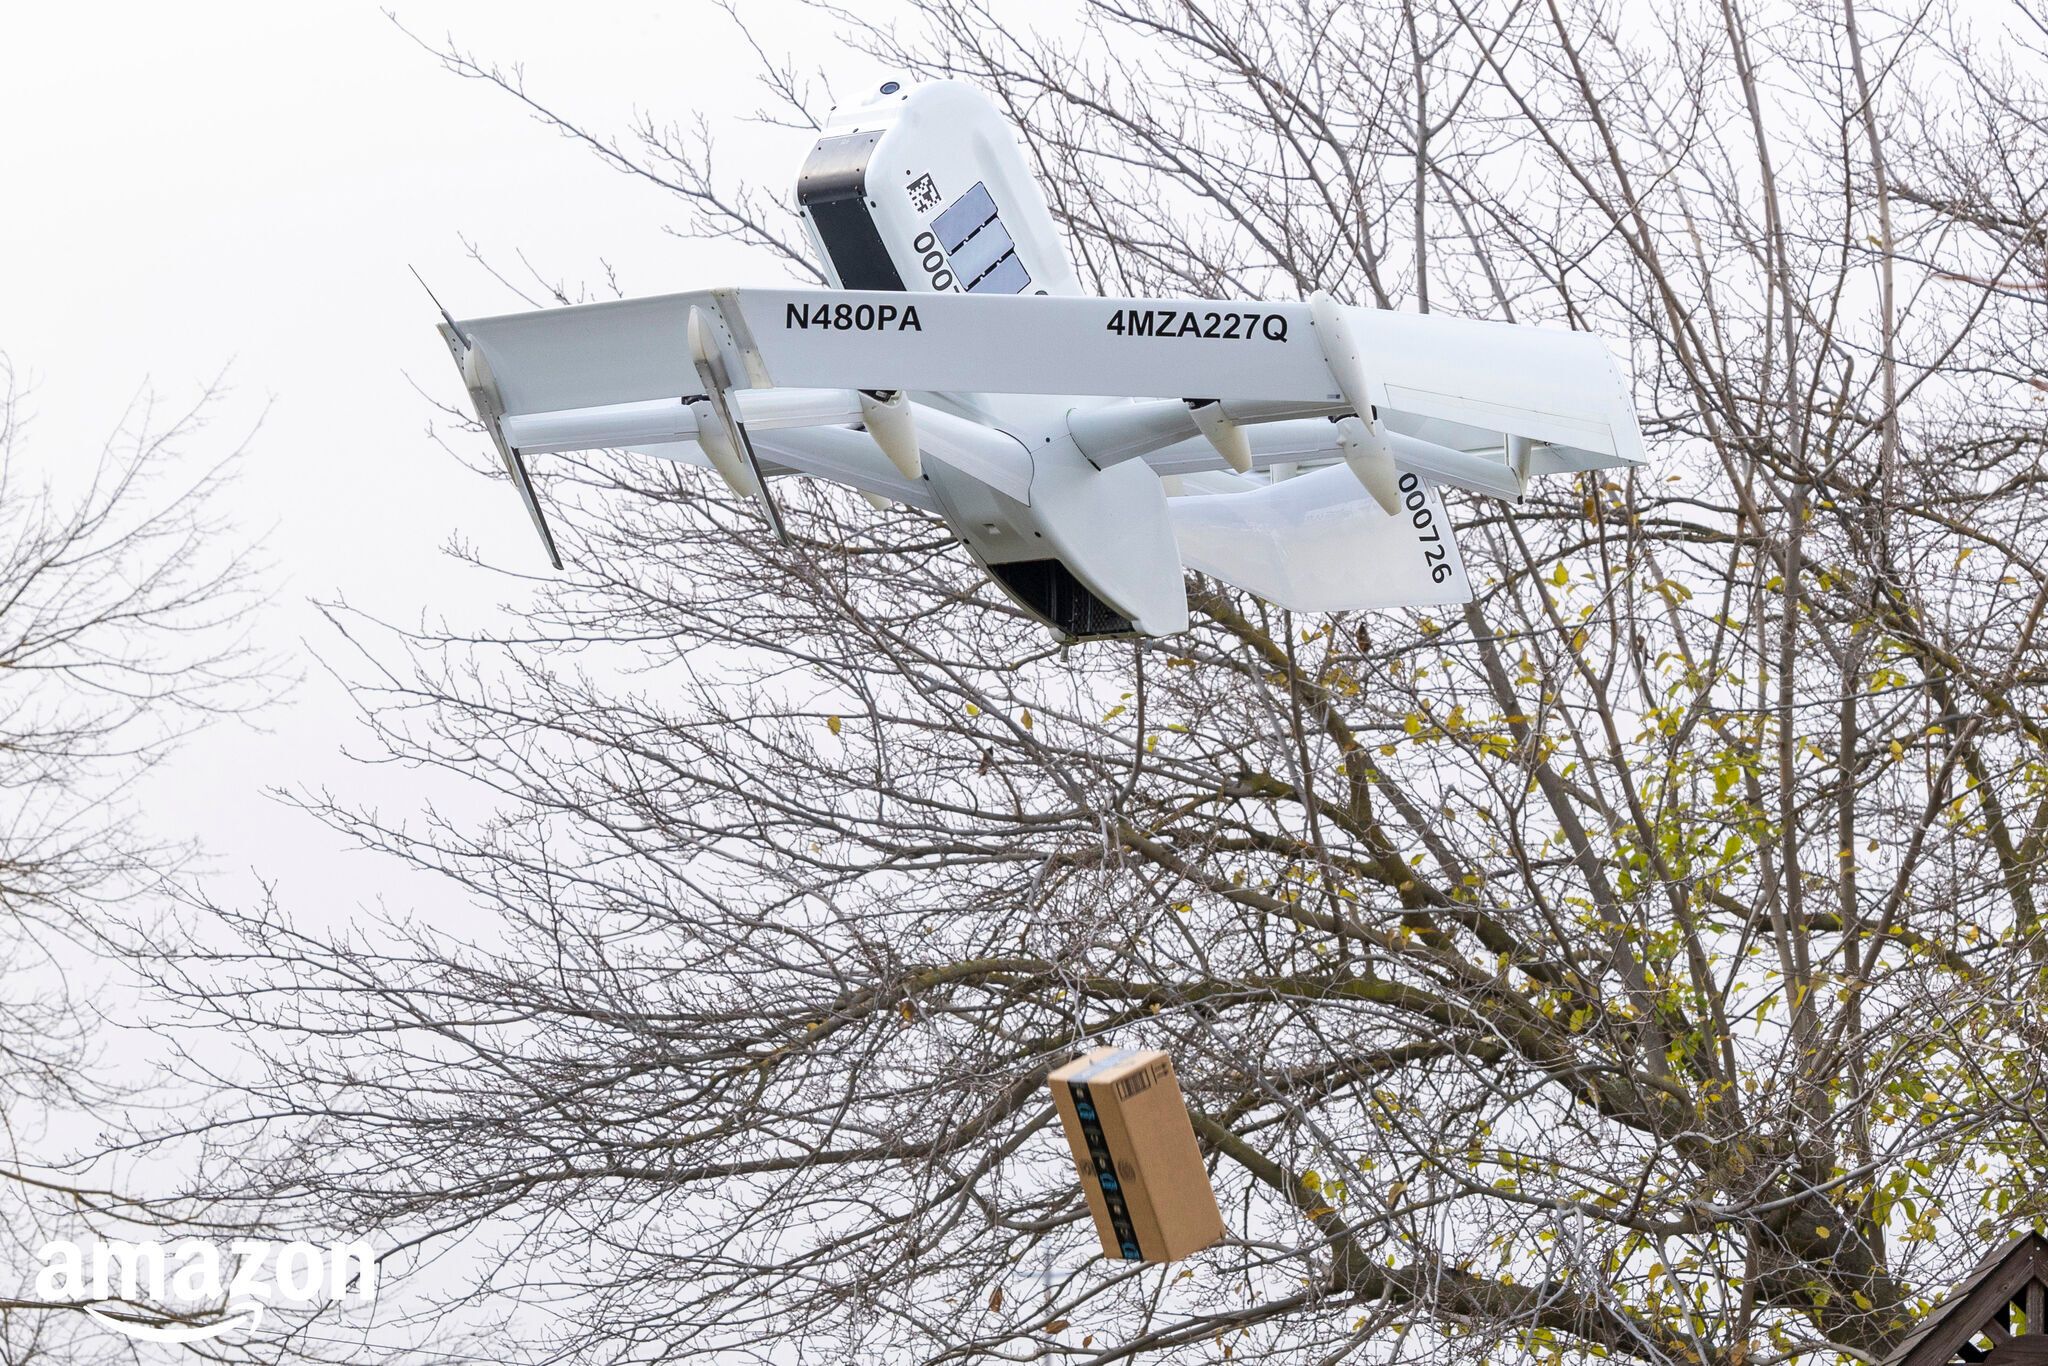 Amazon drone flying in air with a package hanging from a string